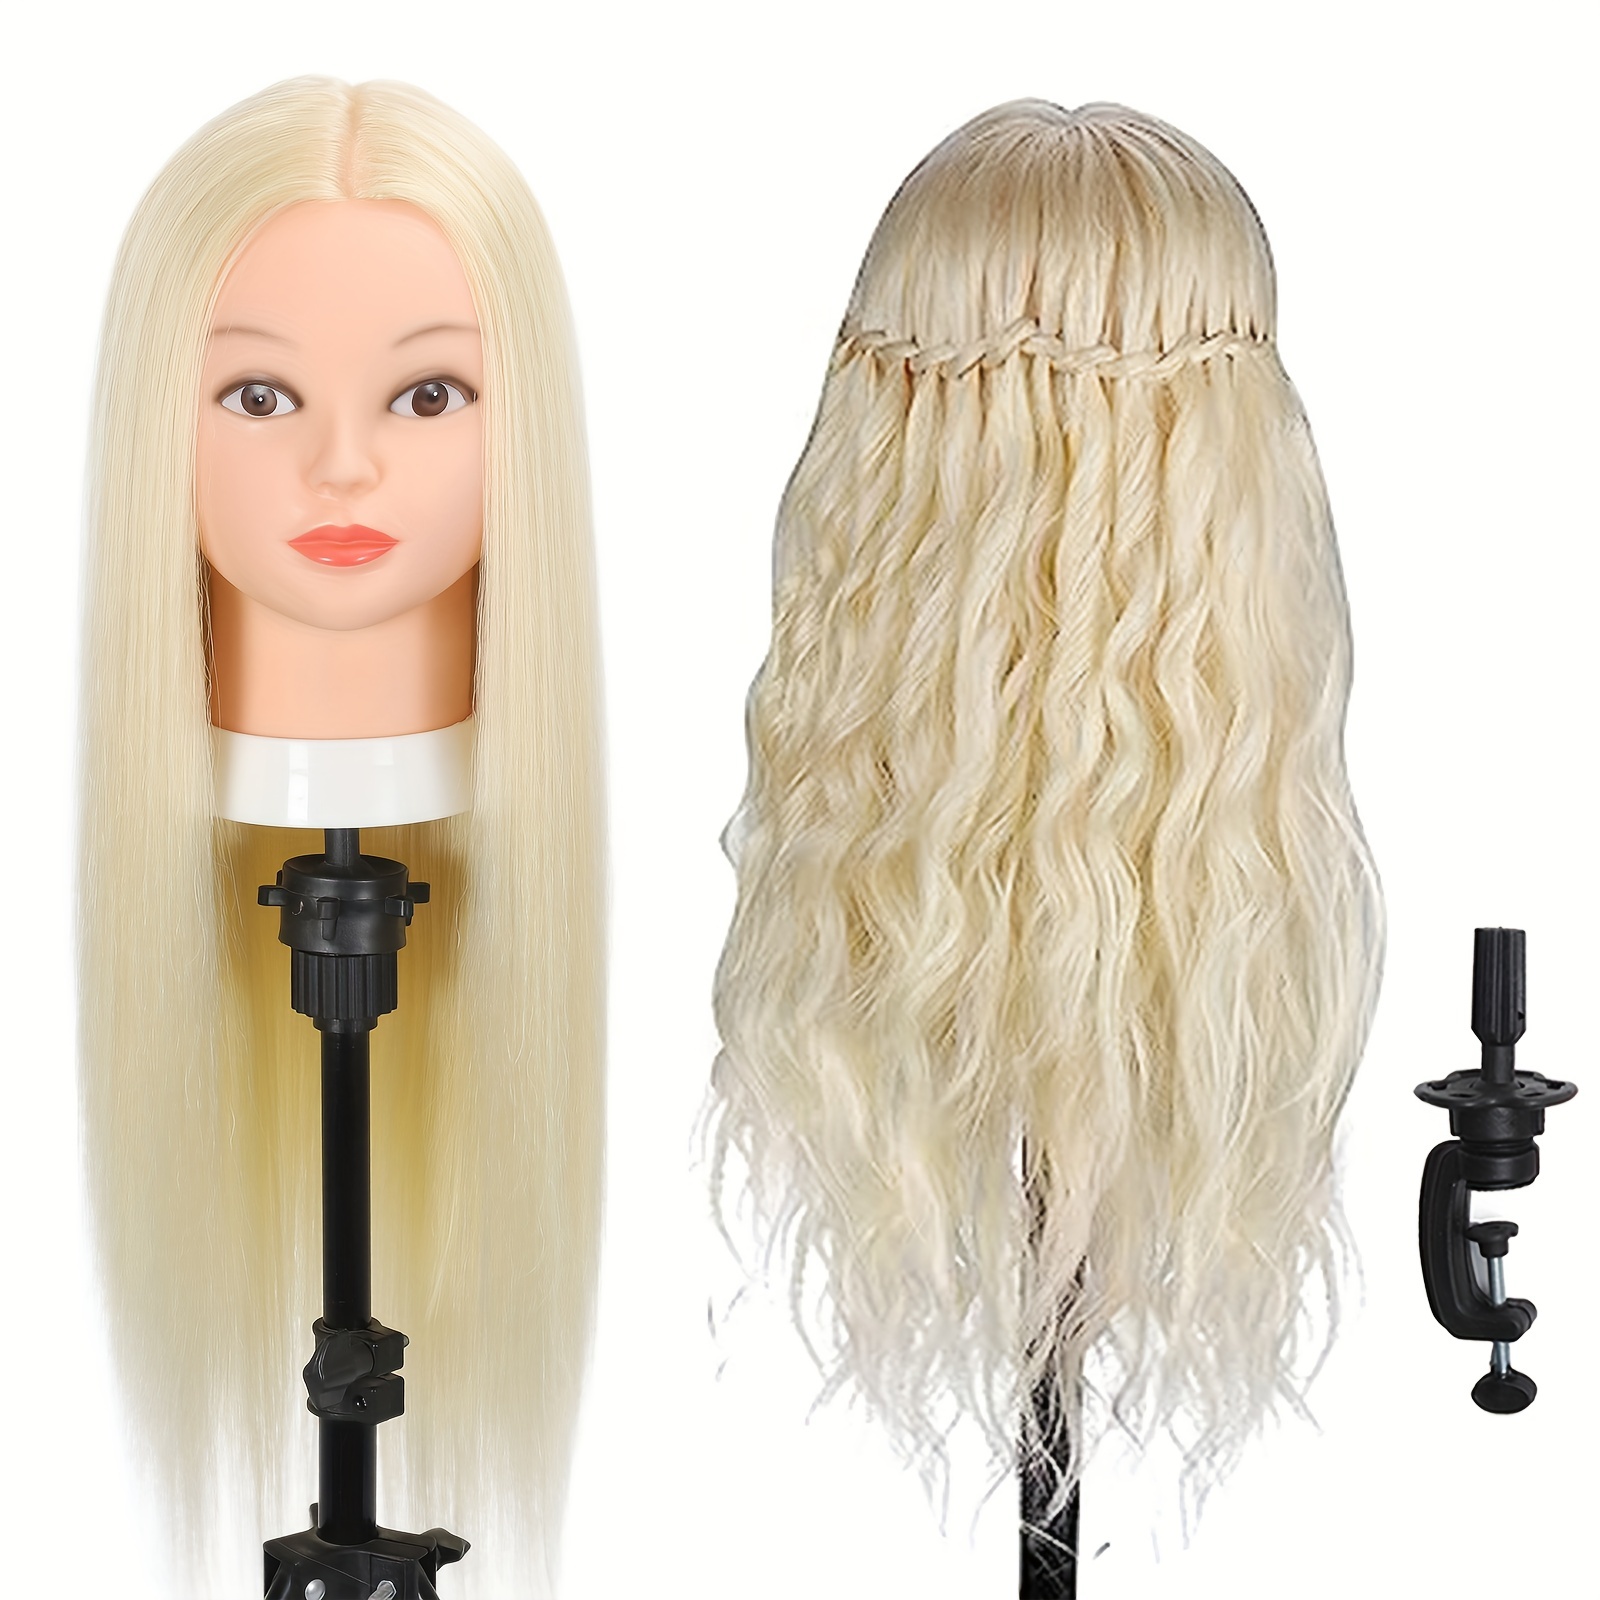 Children's Hairdresser Styling Kit with 1 Mannequin Doll Head by